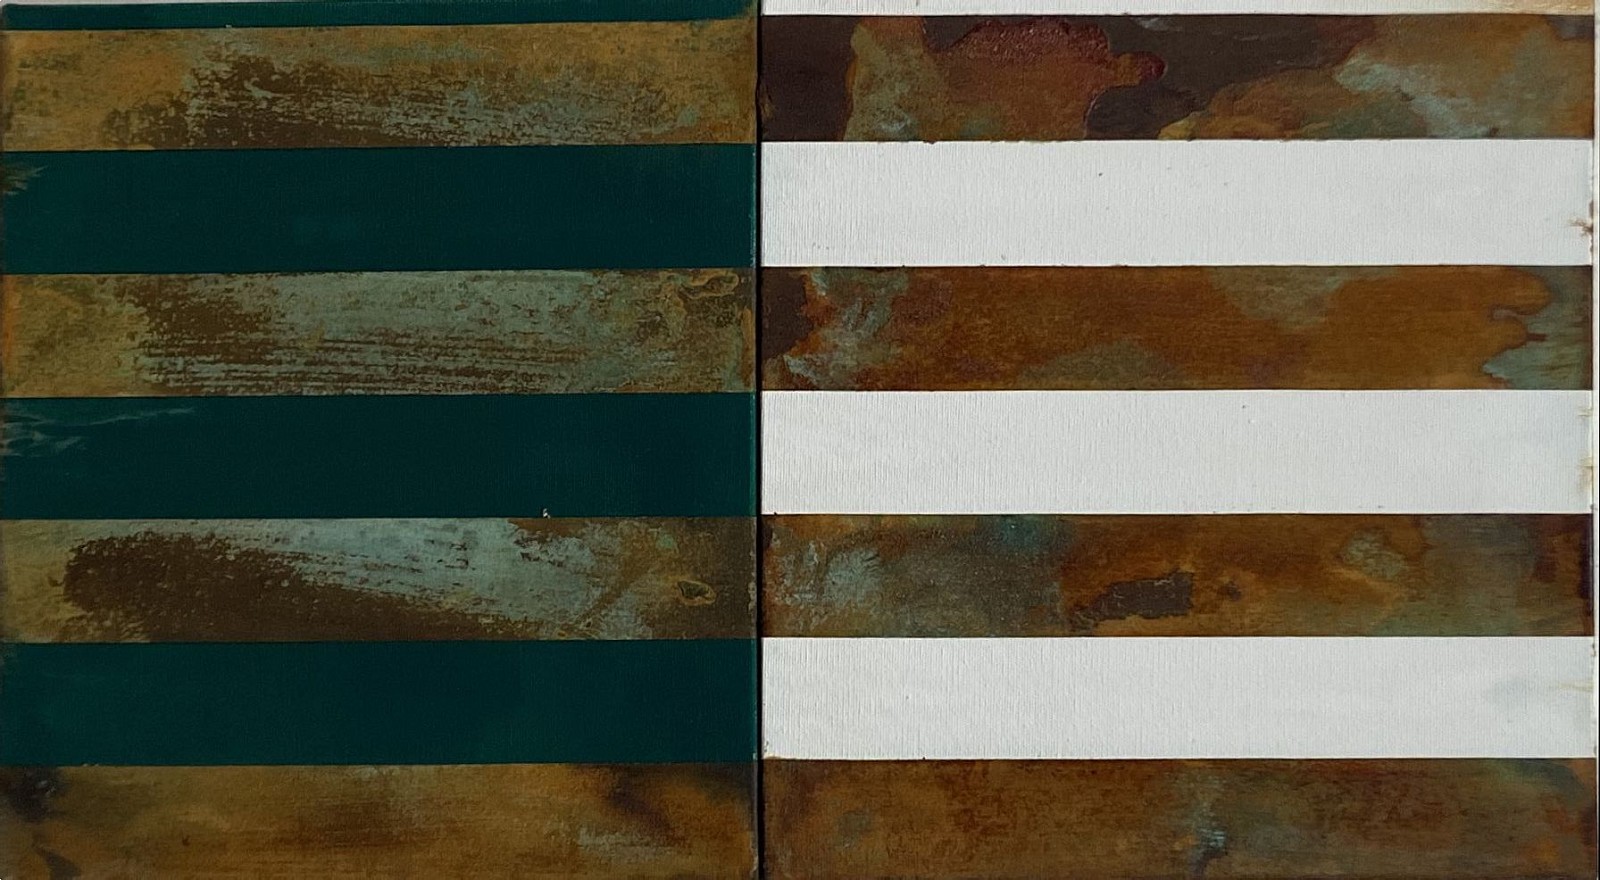 JOSE BECHARA, Sem titulo #230, 2023
acrylic and oxidation of steel on canvas, 23 1/2 x 13 3/4 x 2 1/4 in. (60 x 35 x 6 cm)
BJ-C-0138